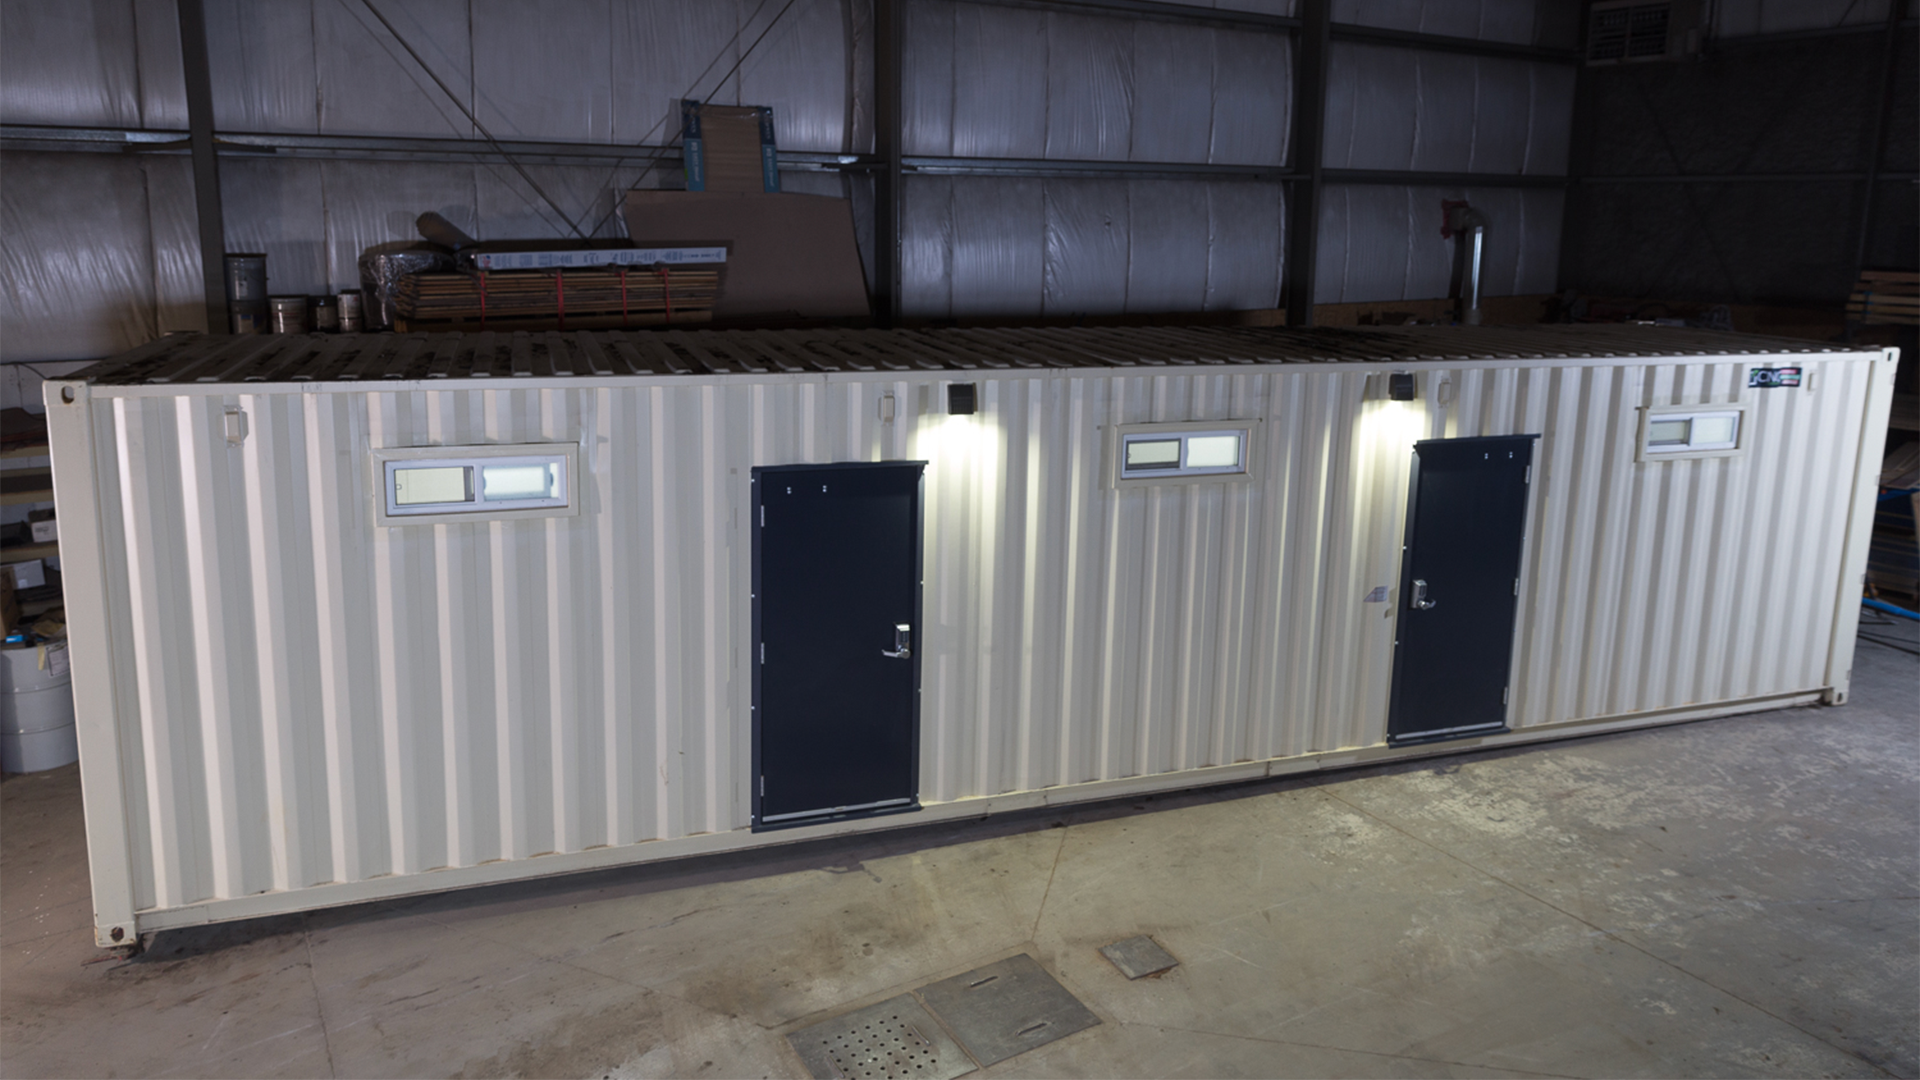 Exterior photo of lunchroom container with two doors